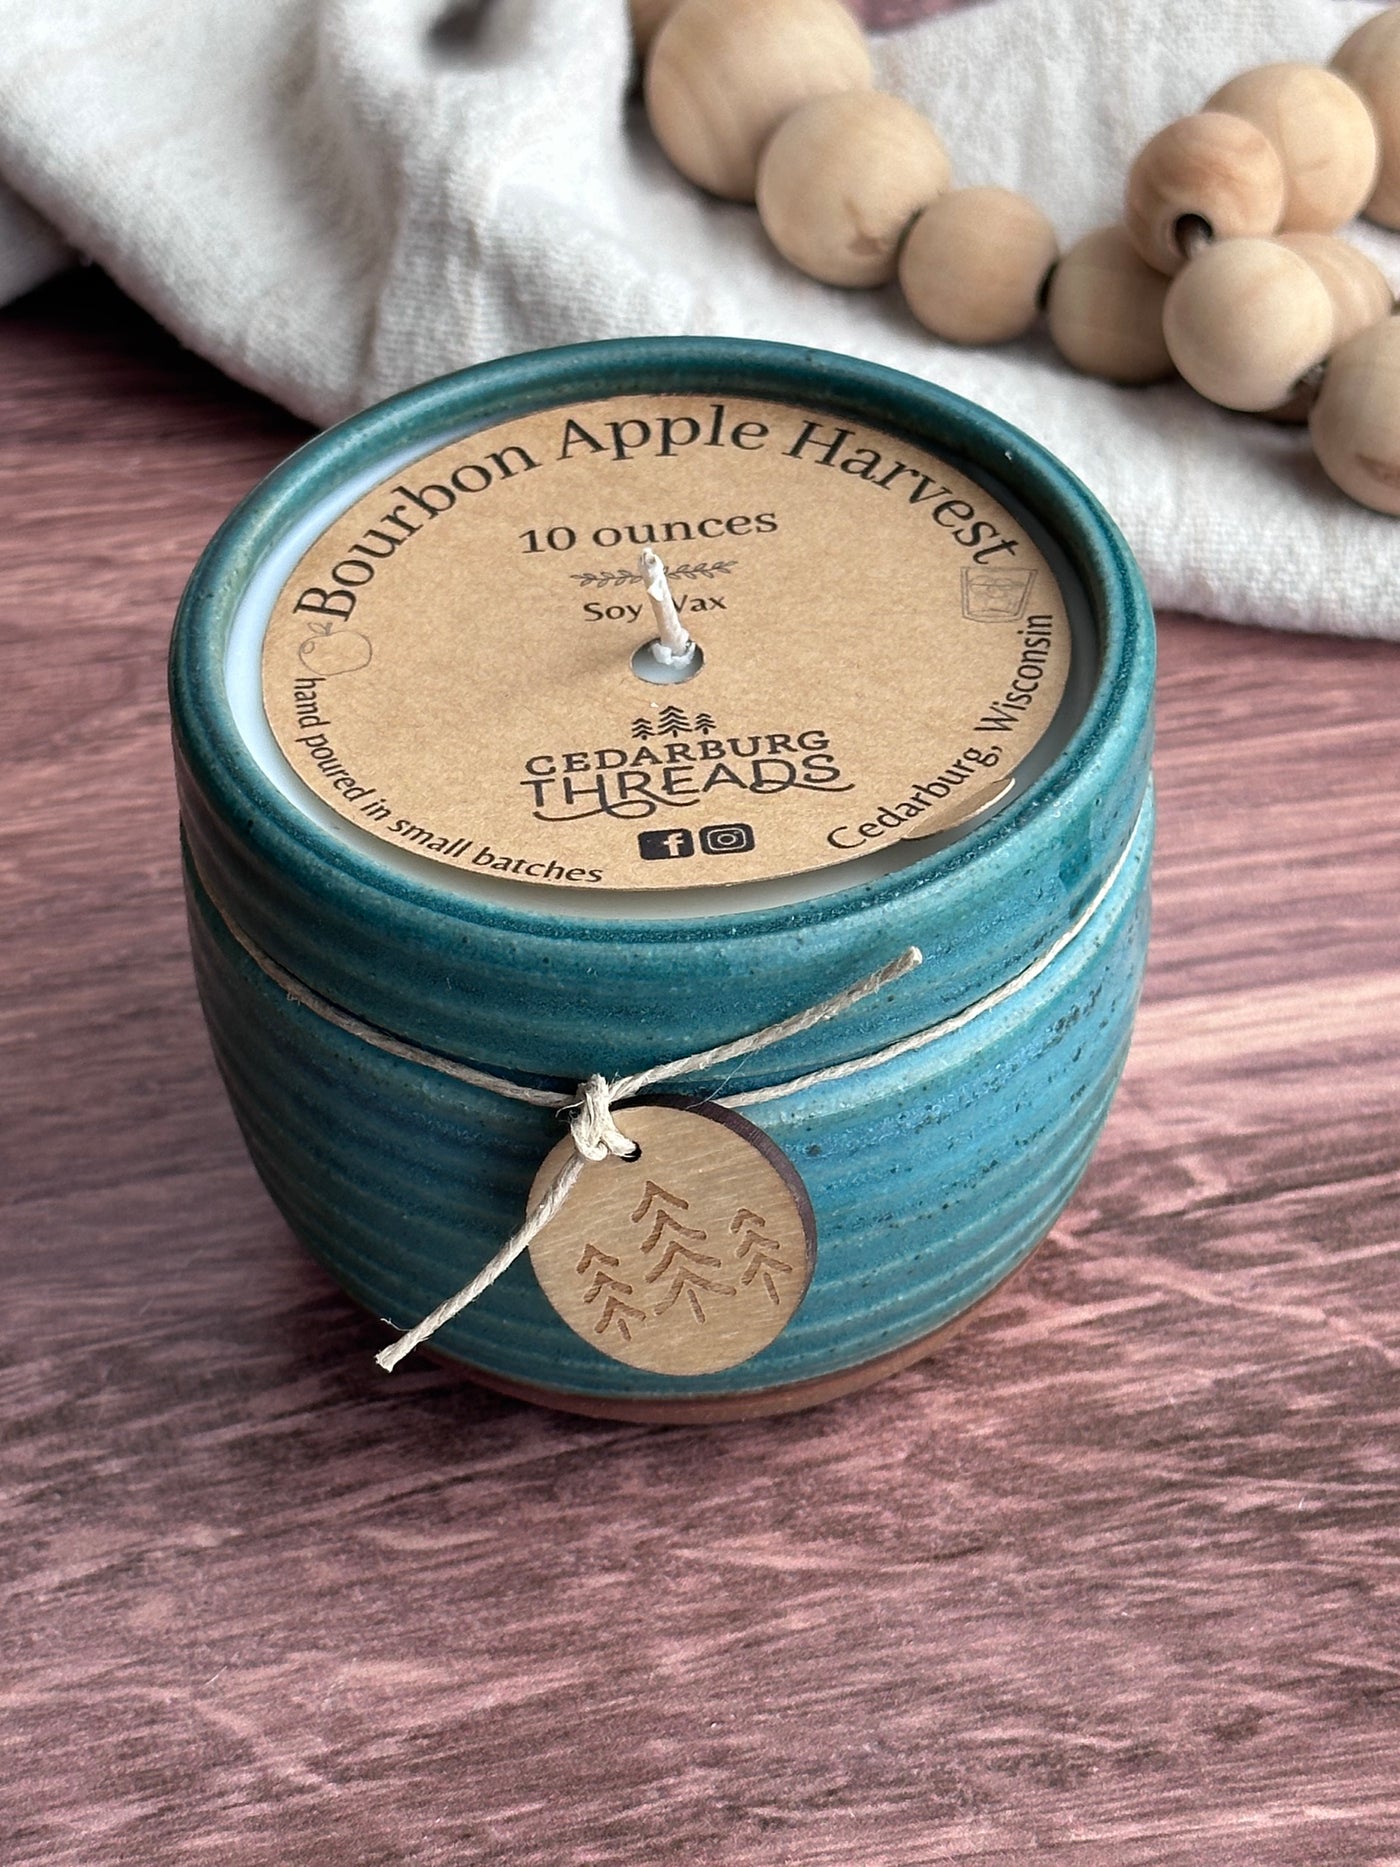 Bourbon Apple Harvest soy candle 10 ounces in teal ceramic vessel